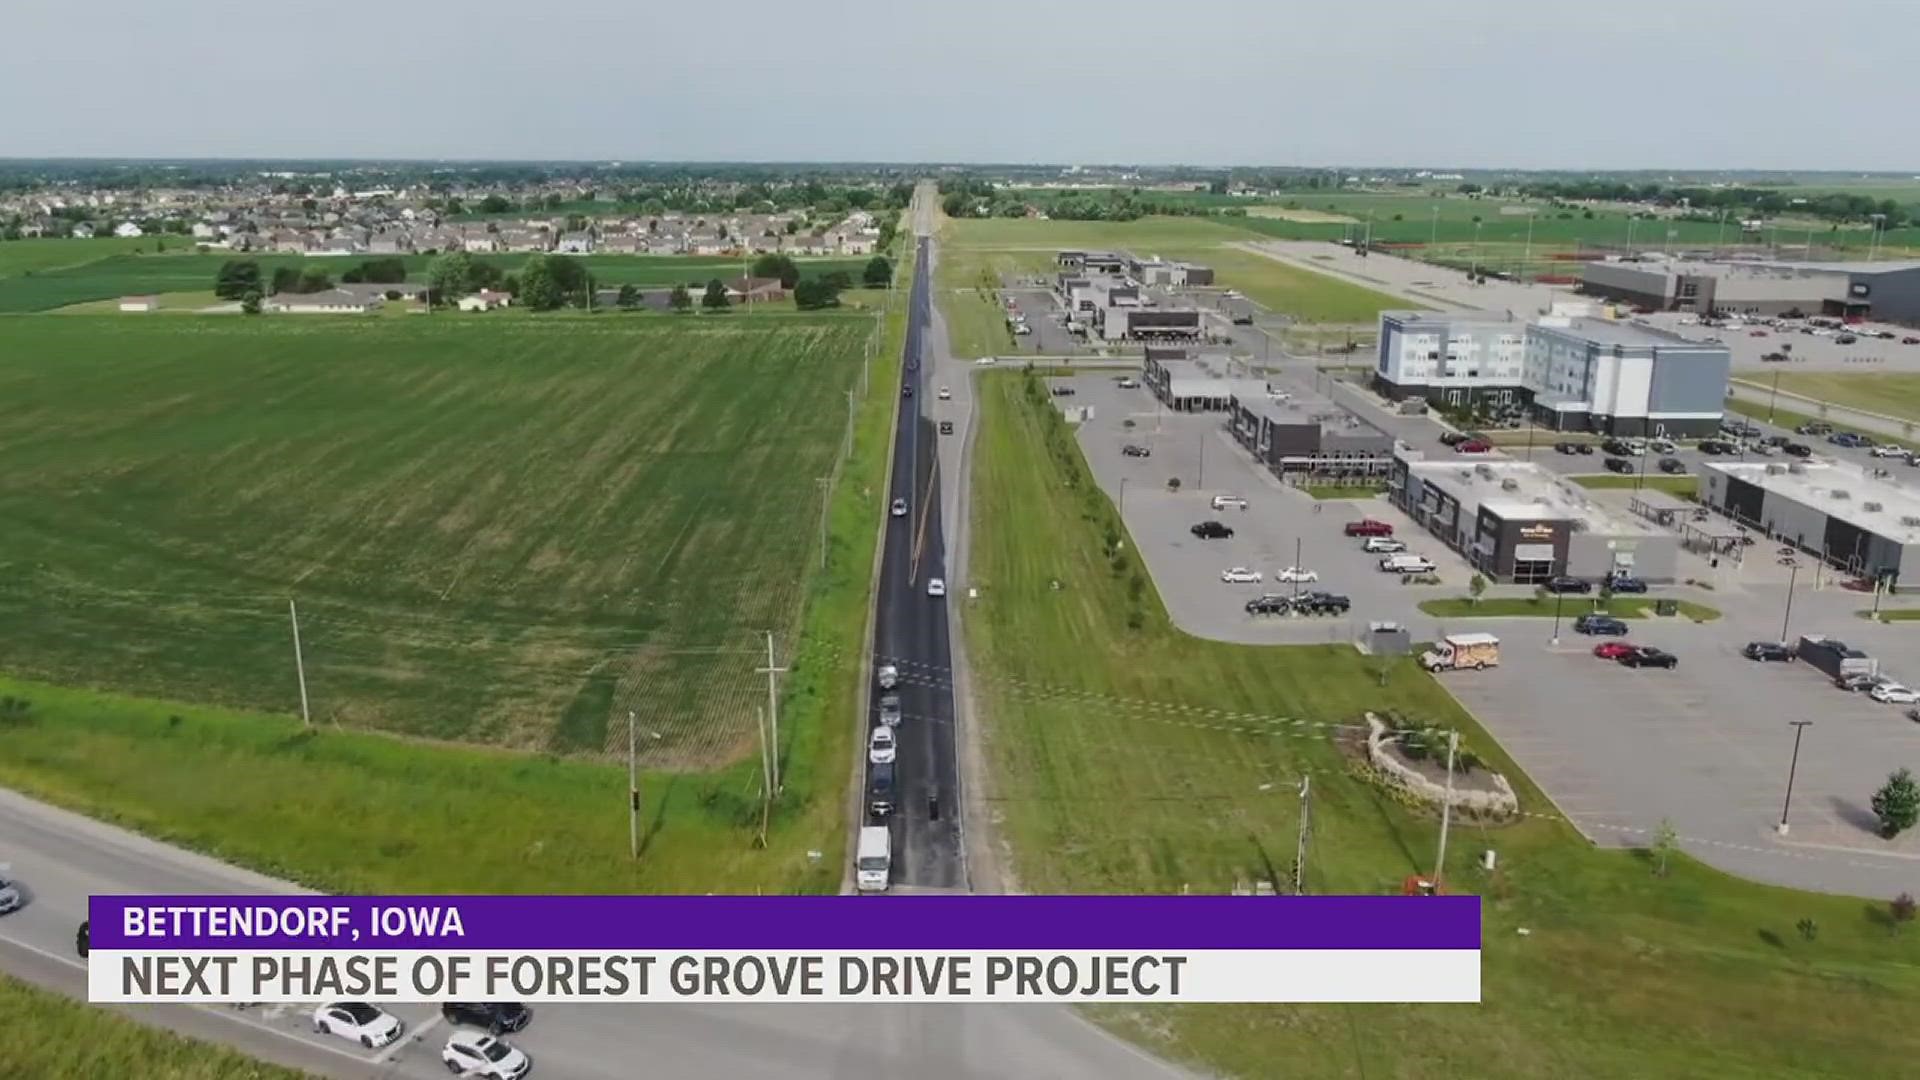 The intersection of Forest Grove Drive and Middle Road will be closed to facilitate the next phase of Bettendorf's largest public works project to date.